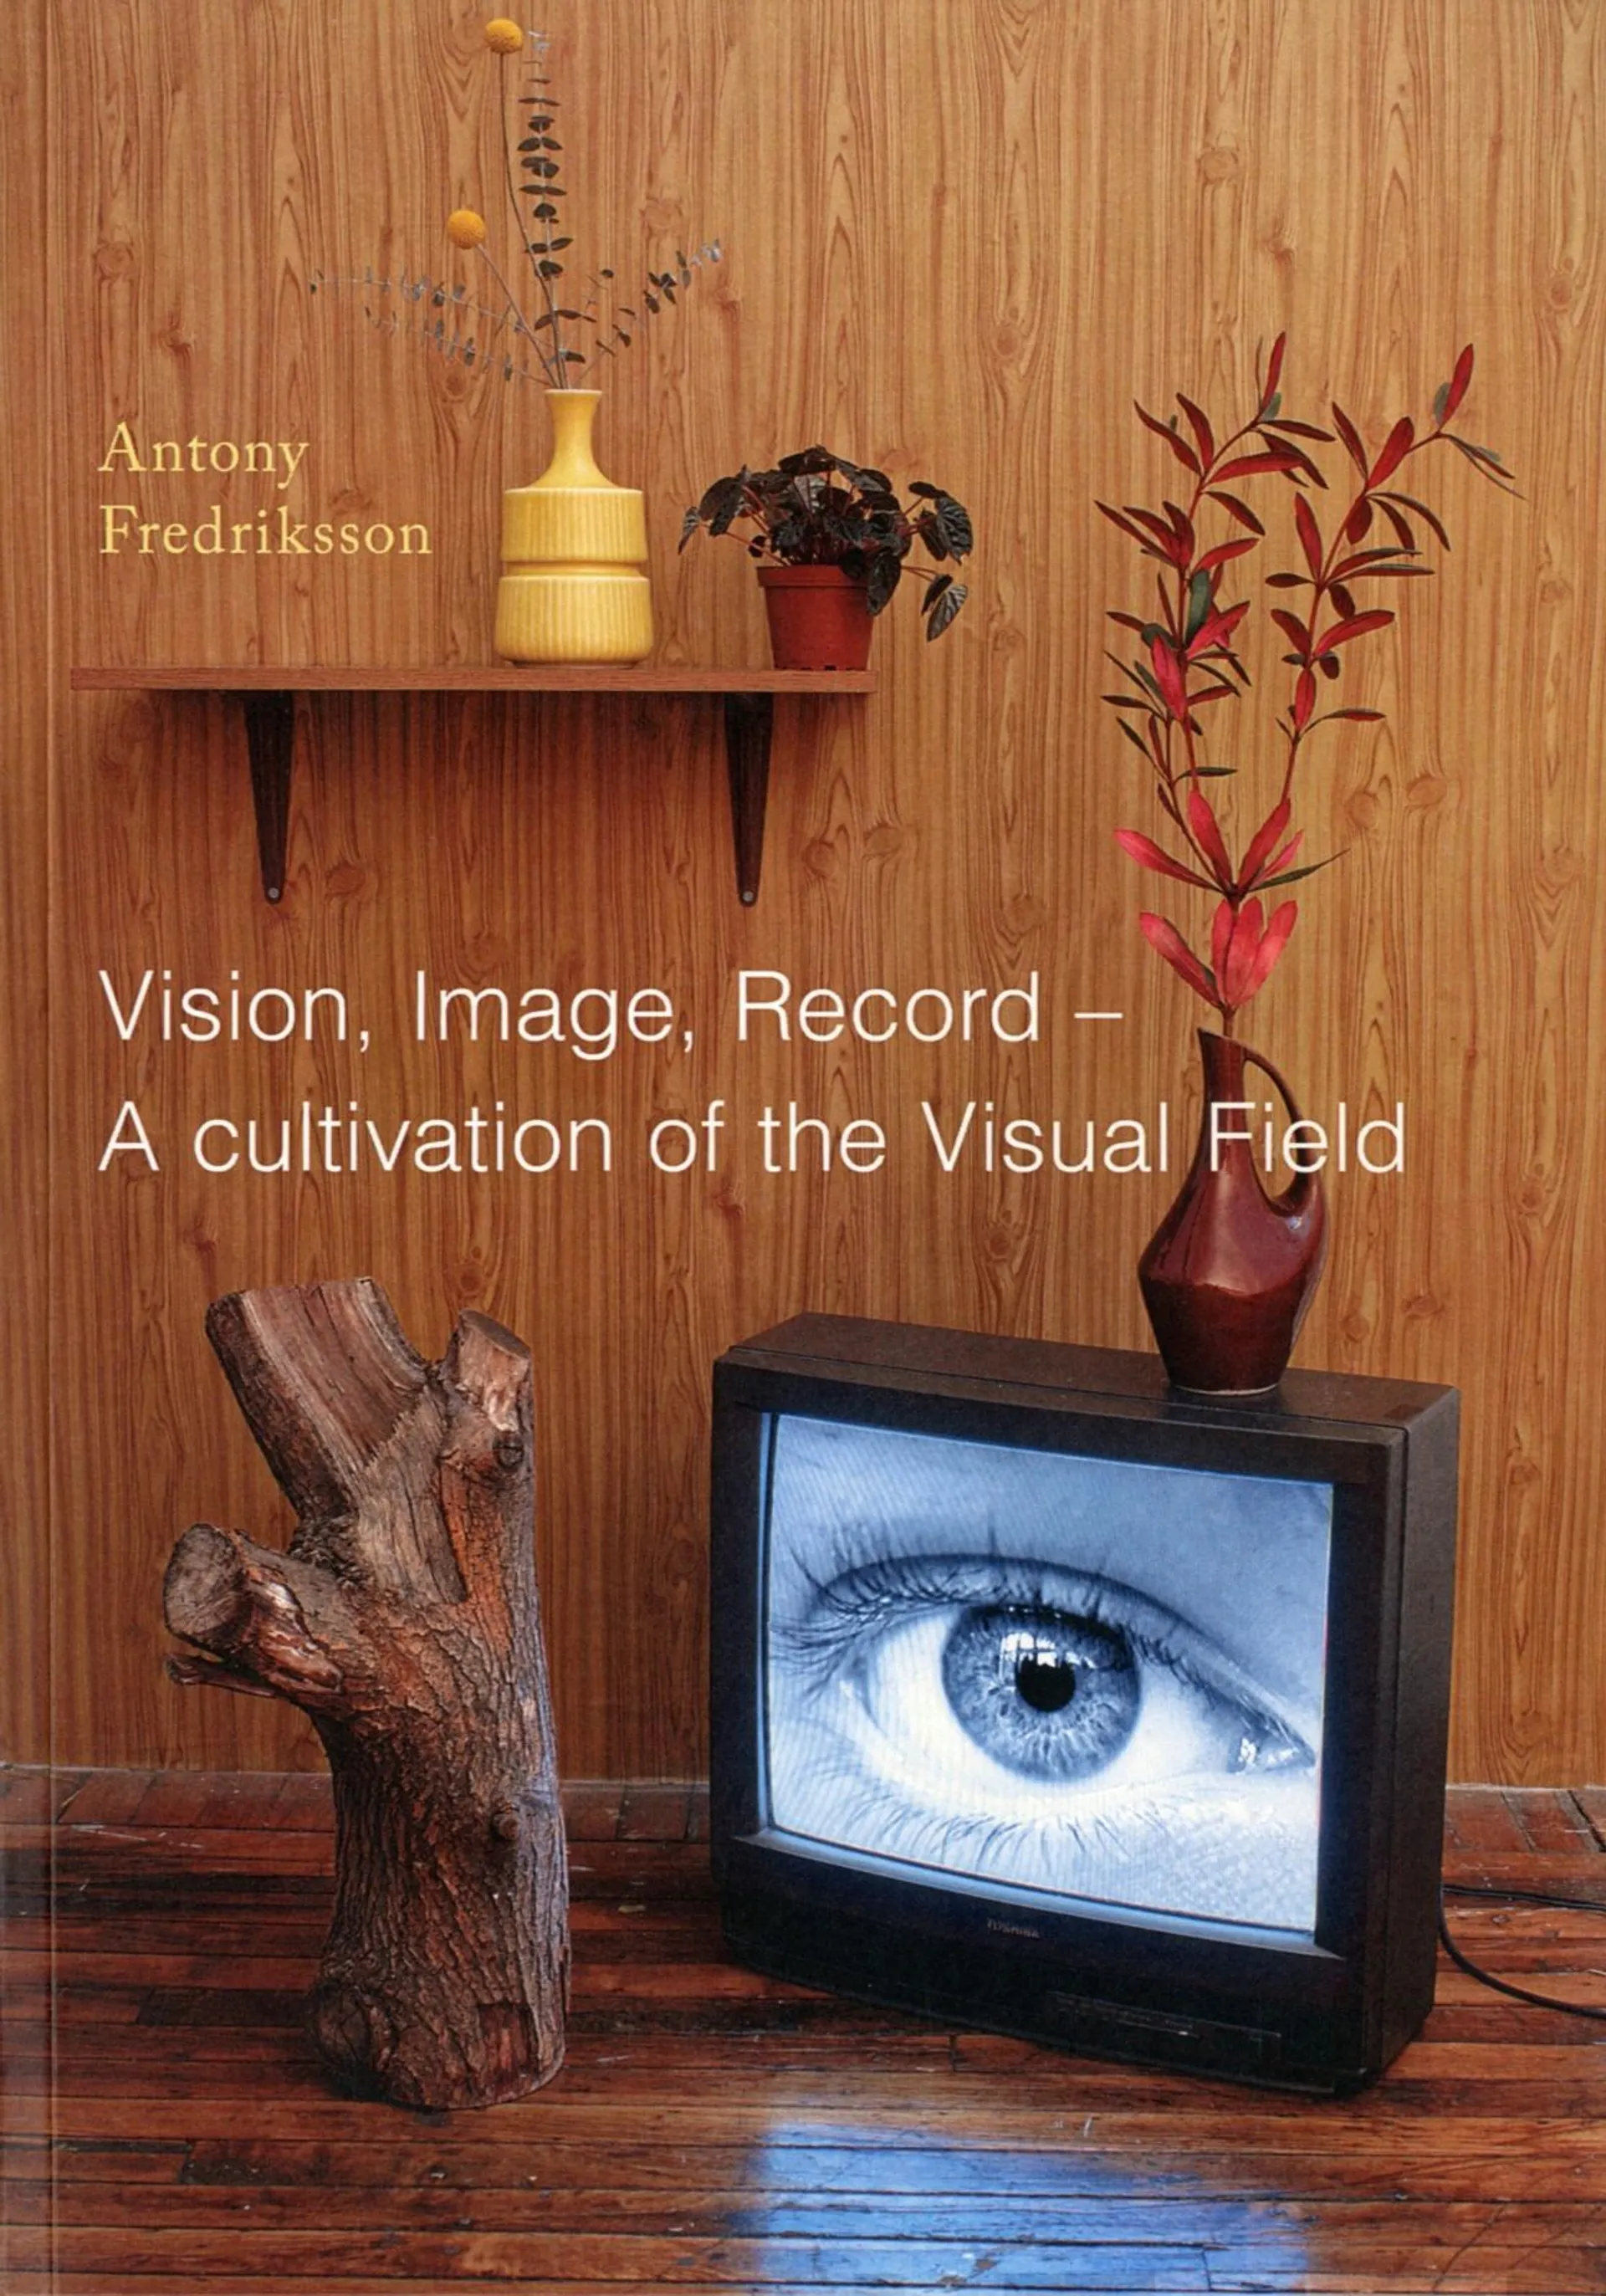 Fredriksson, Vision, Image, Record - A cultivation of the Visual Field